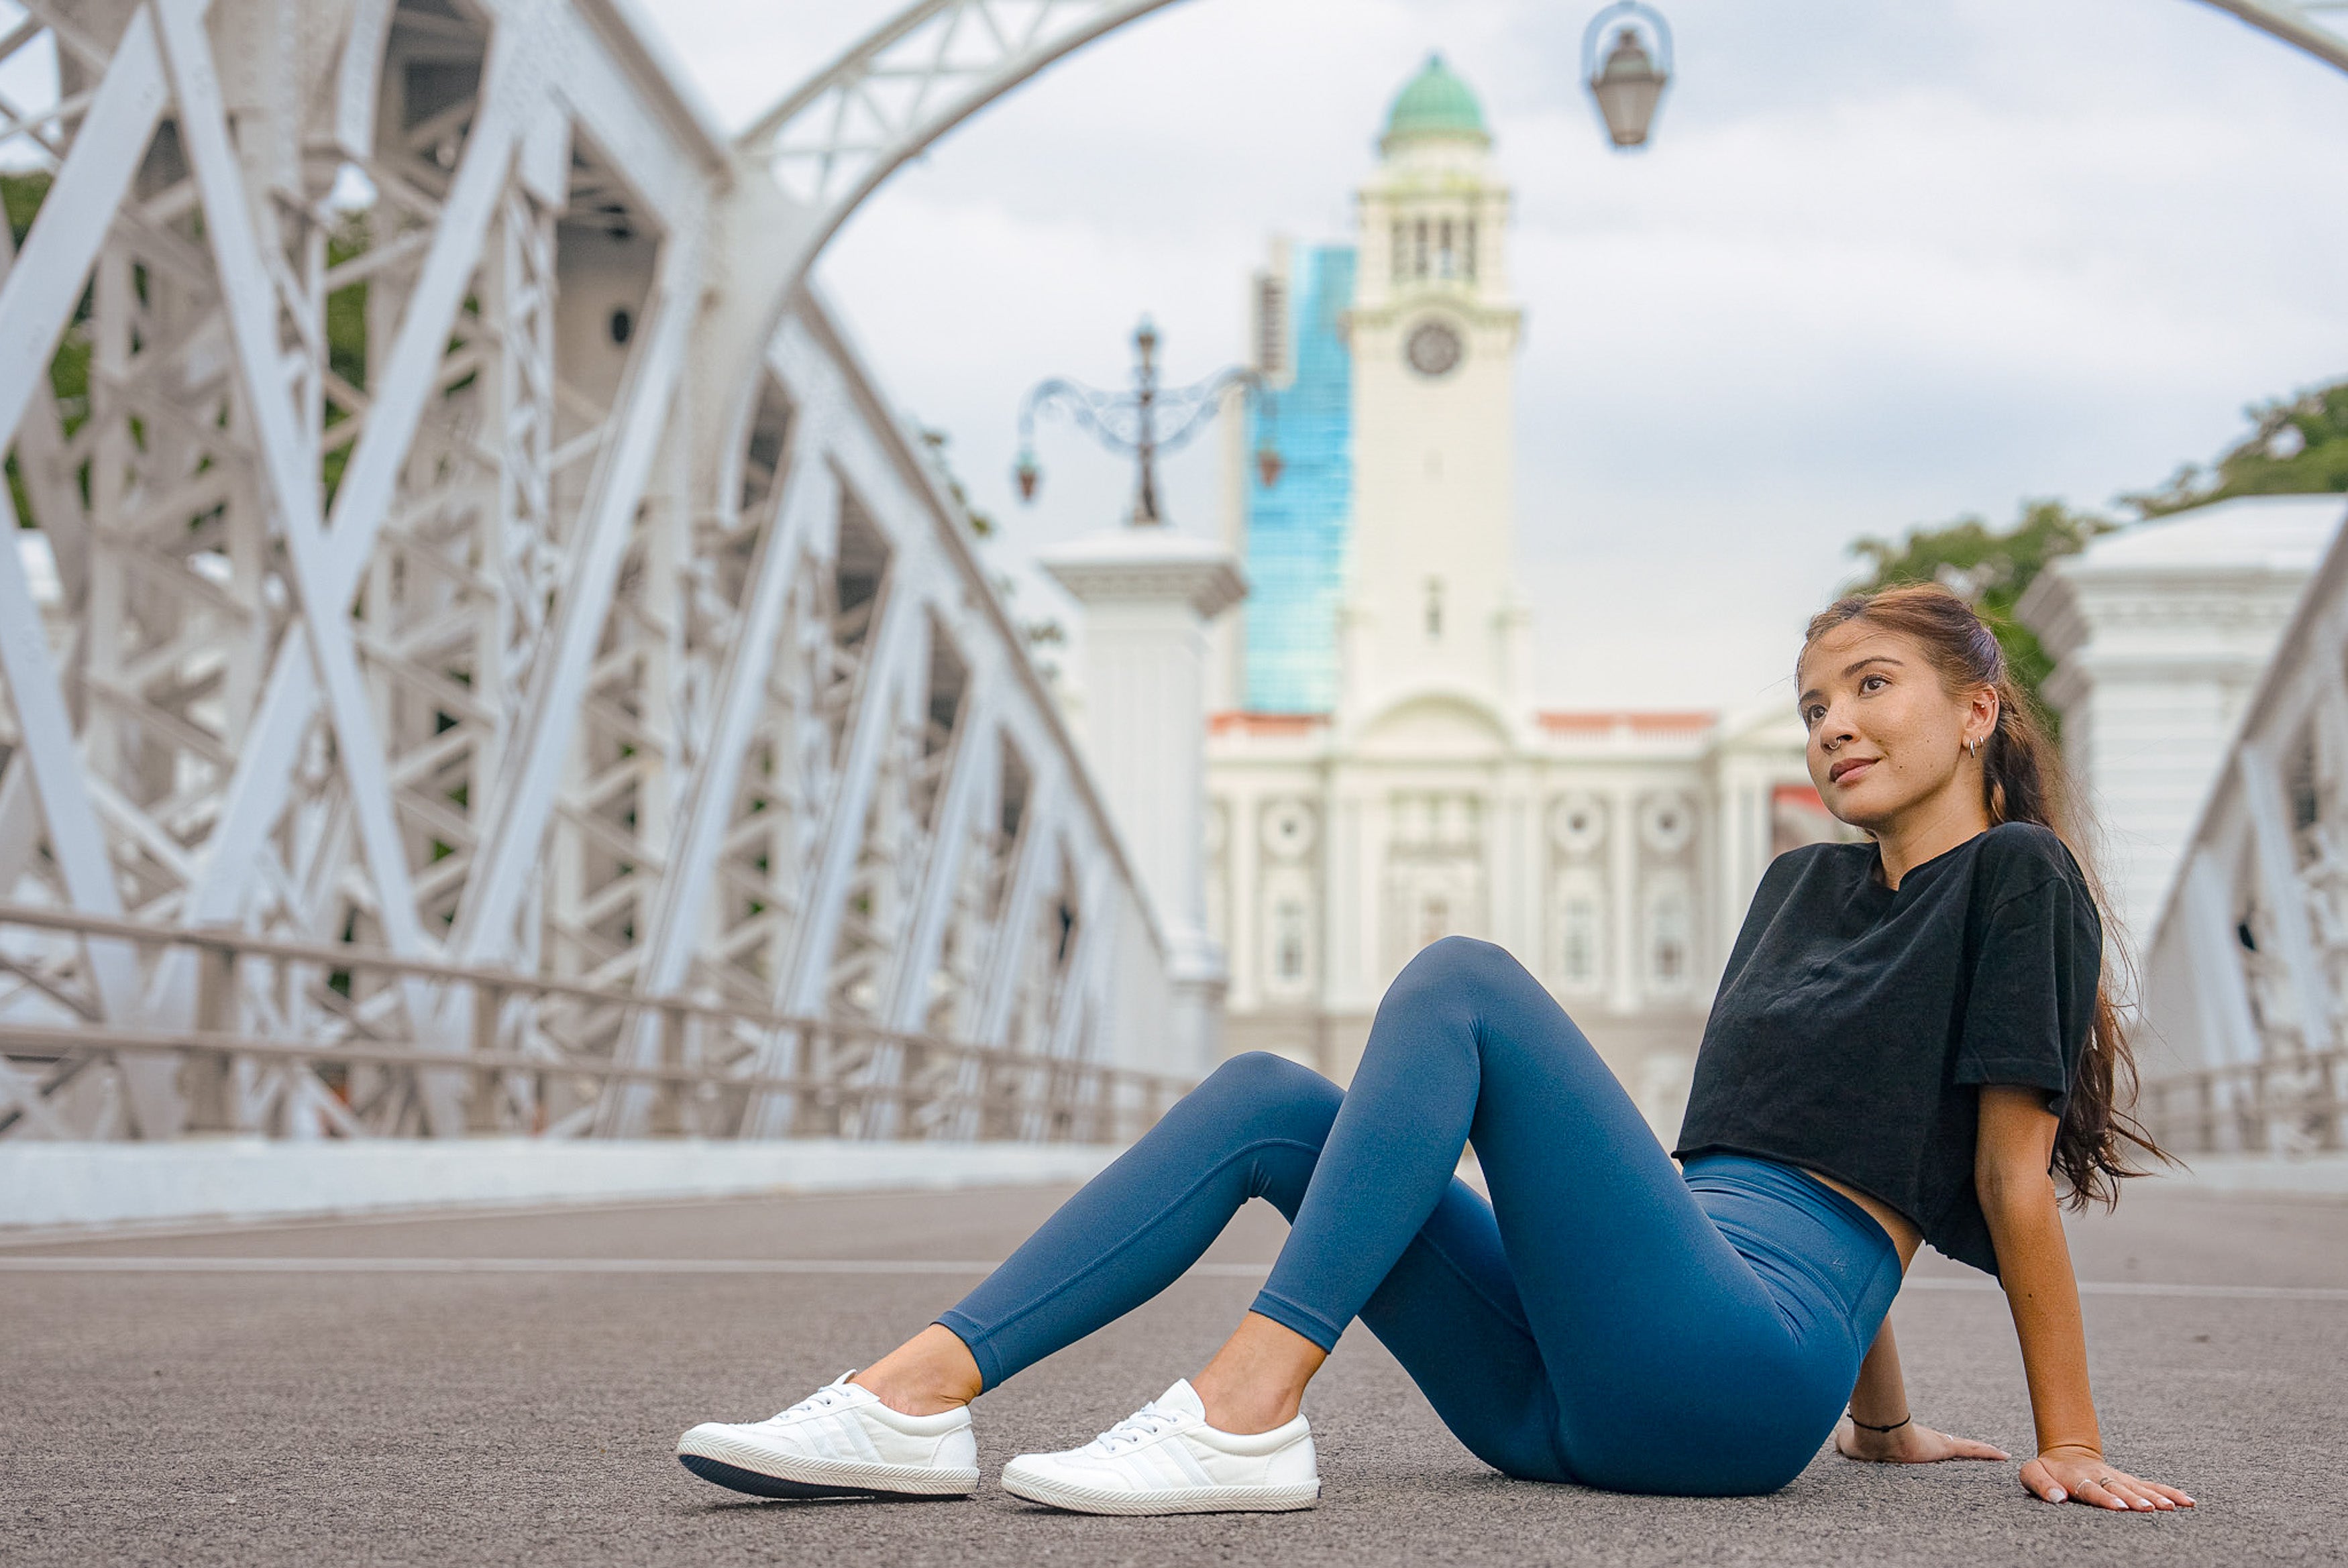 KYDRA PTE LTD. on LinkedIn: From shorts on Indiegogo to Orchard Road store:  Singapore activewear brand…